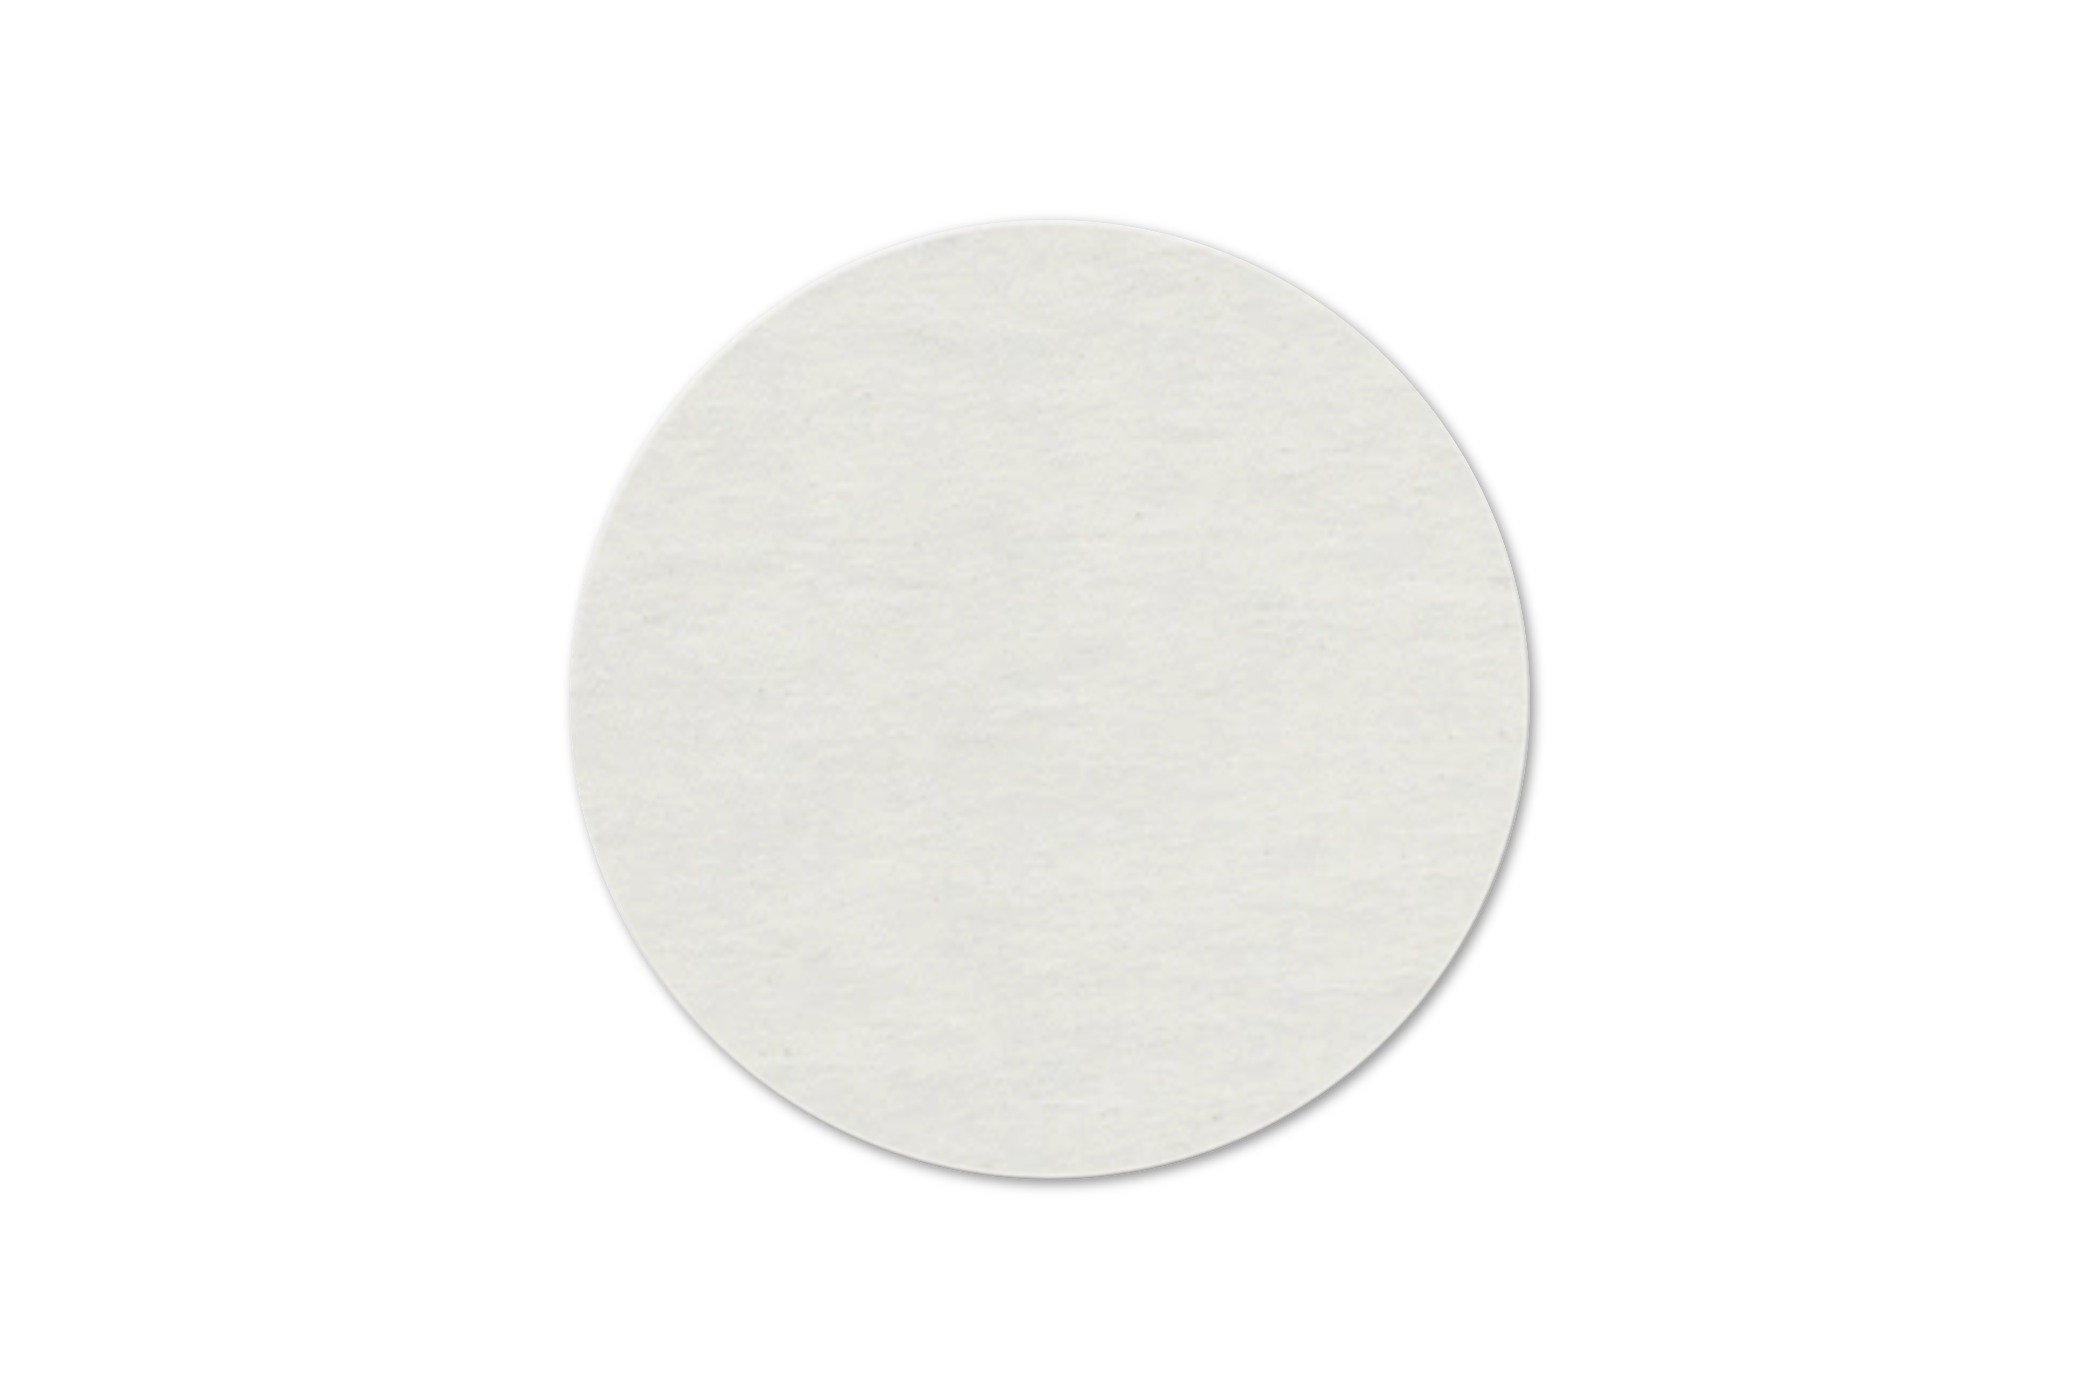 Blank Circle Drink Coasters Drink Coasters for Parties & Home 50 Count  95001 